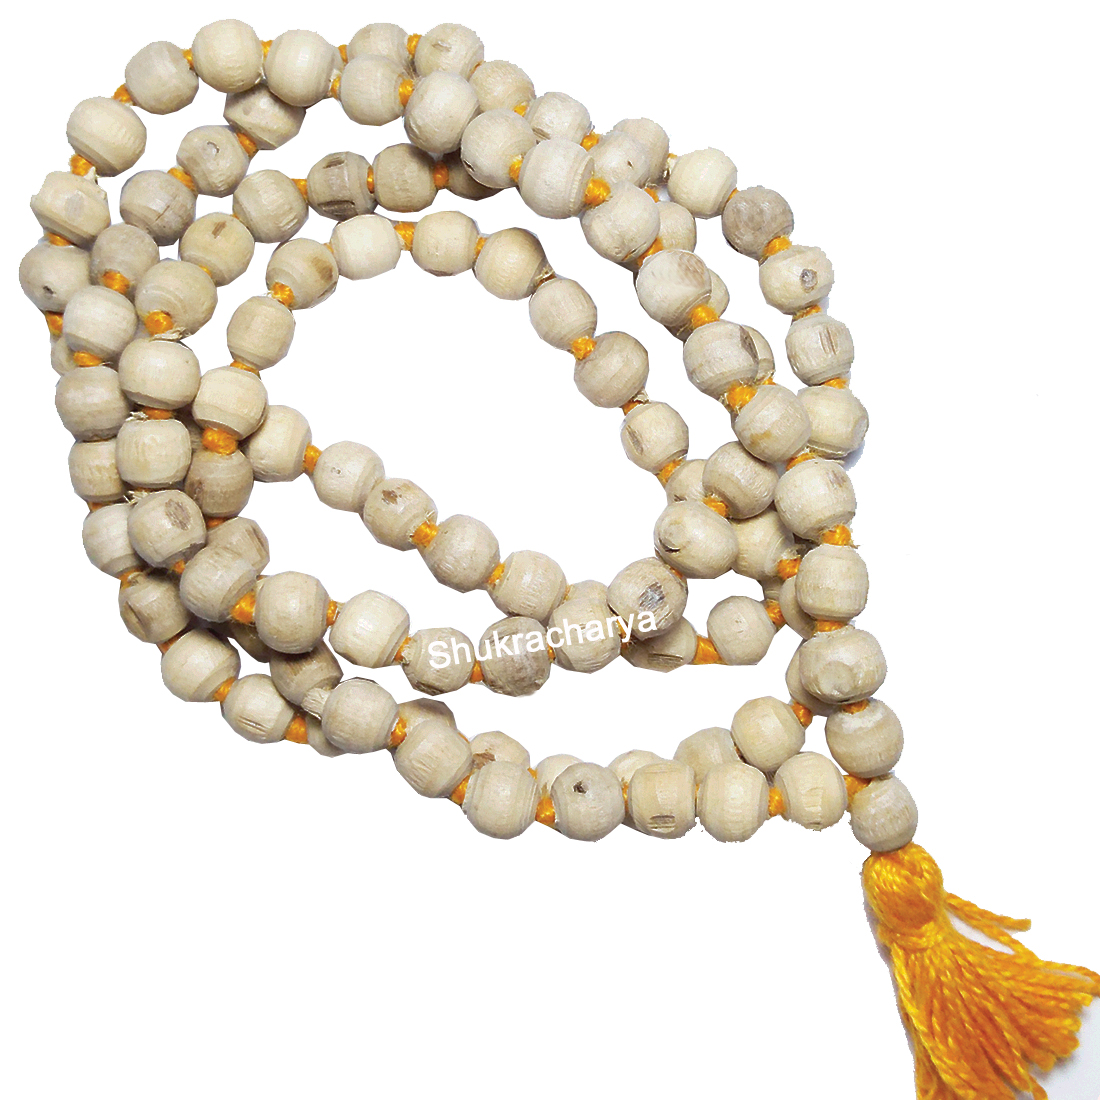 Tulsi Mala | Buy online Tulsi Mala from India @ best price from India